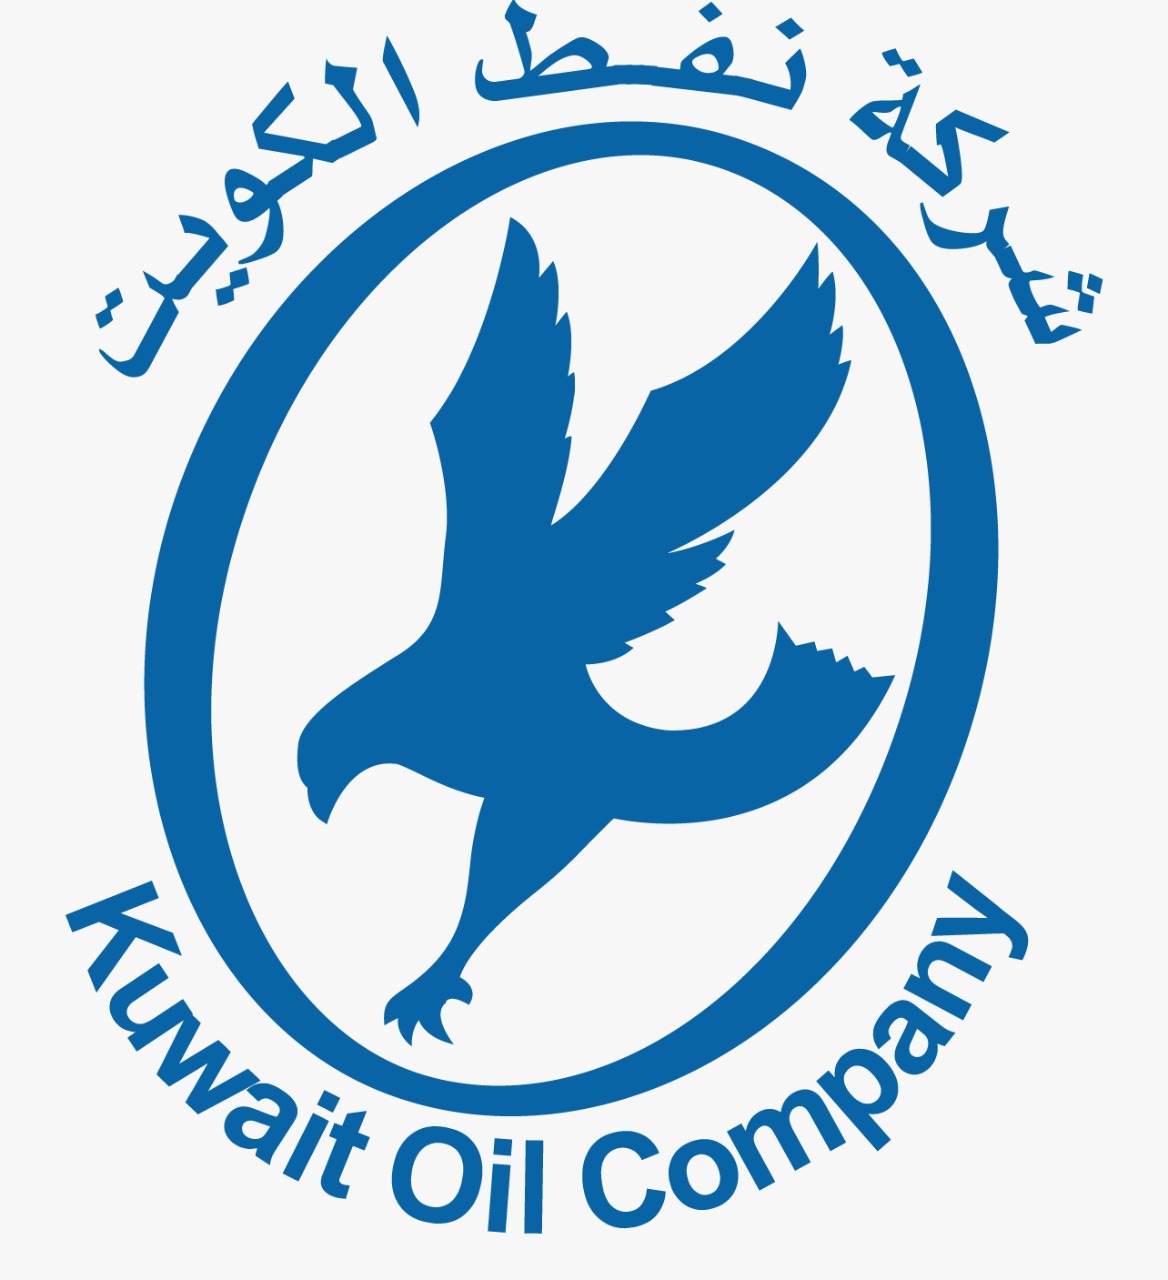 NNIAT attended an online awareness session on Kuwait Oil Company eBusiness portal